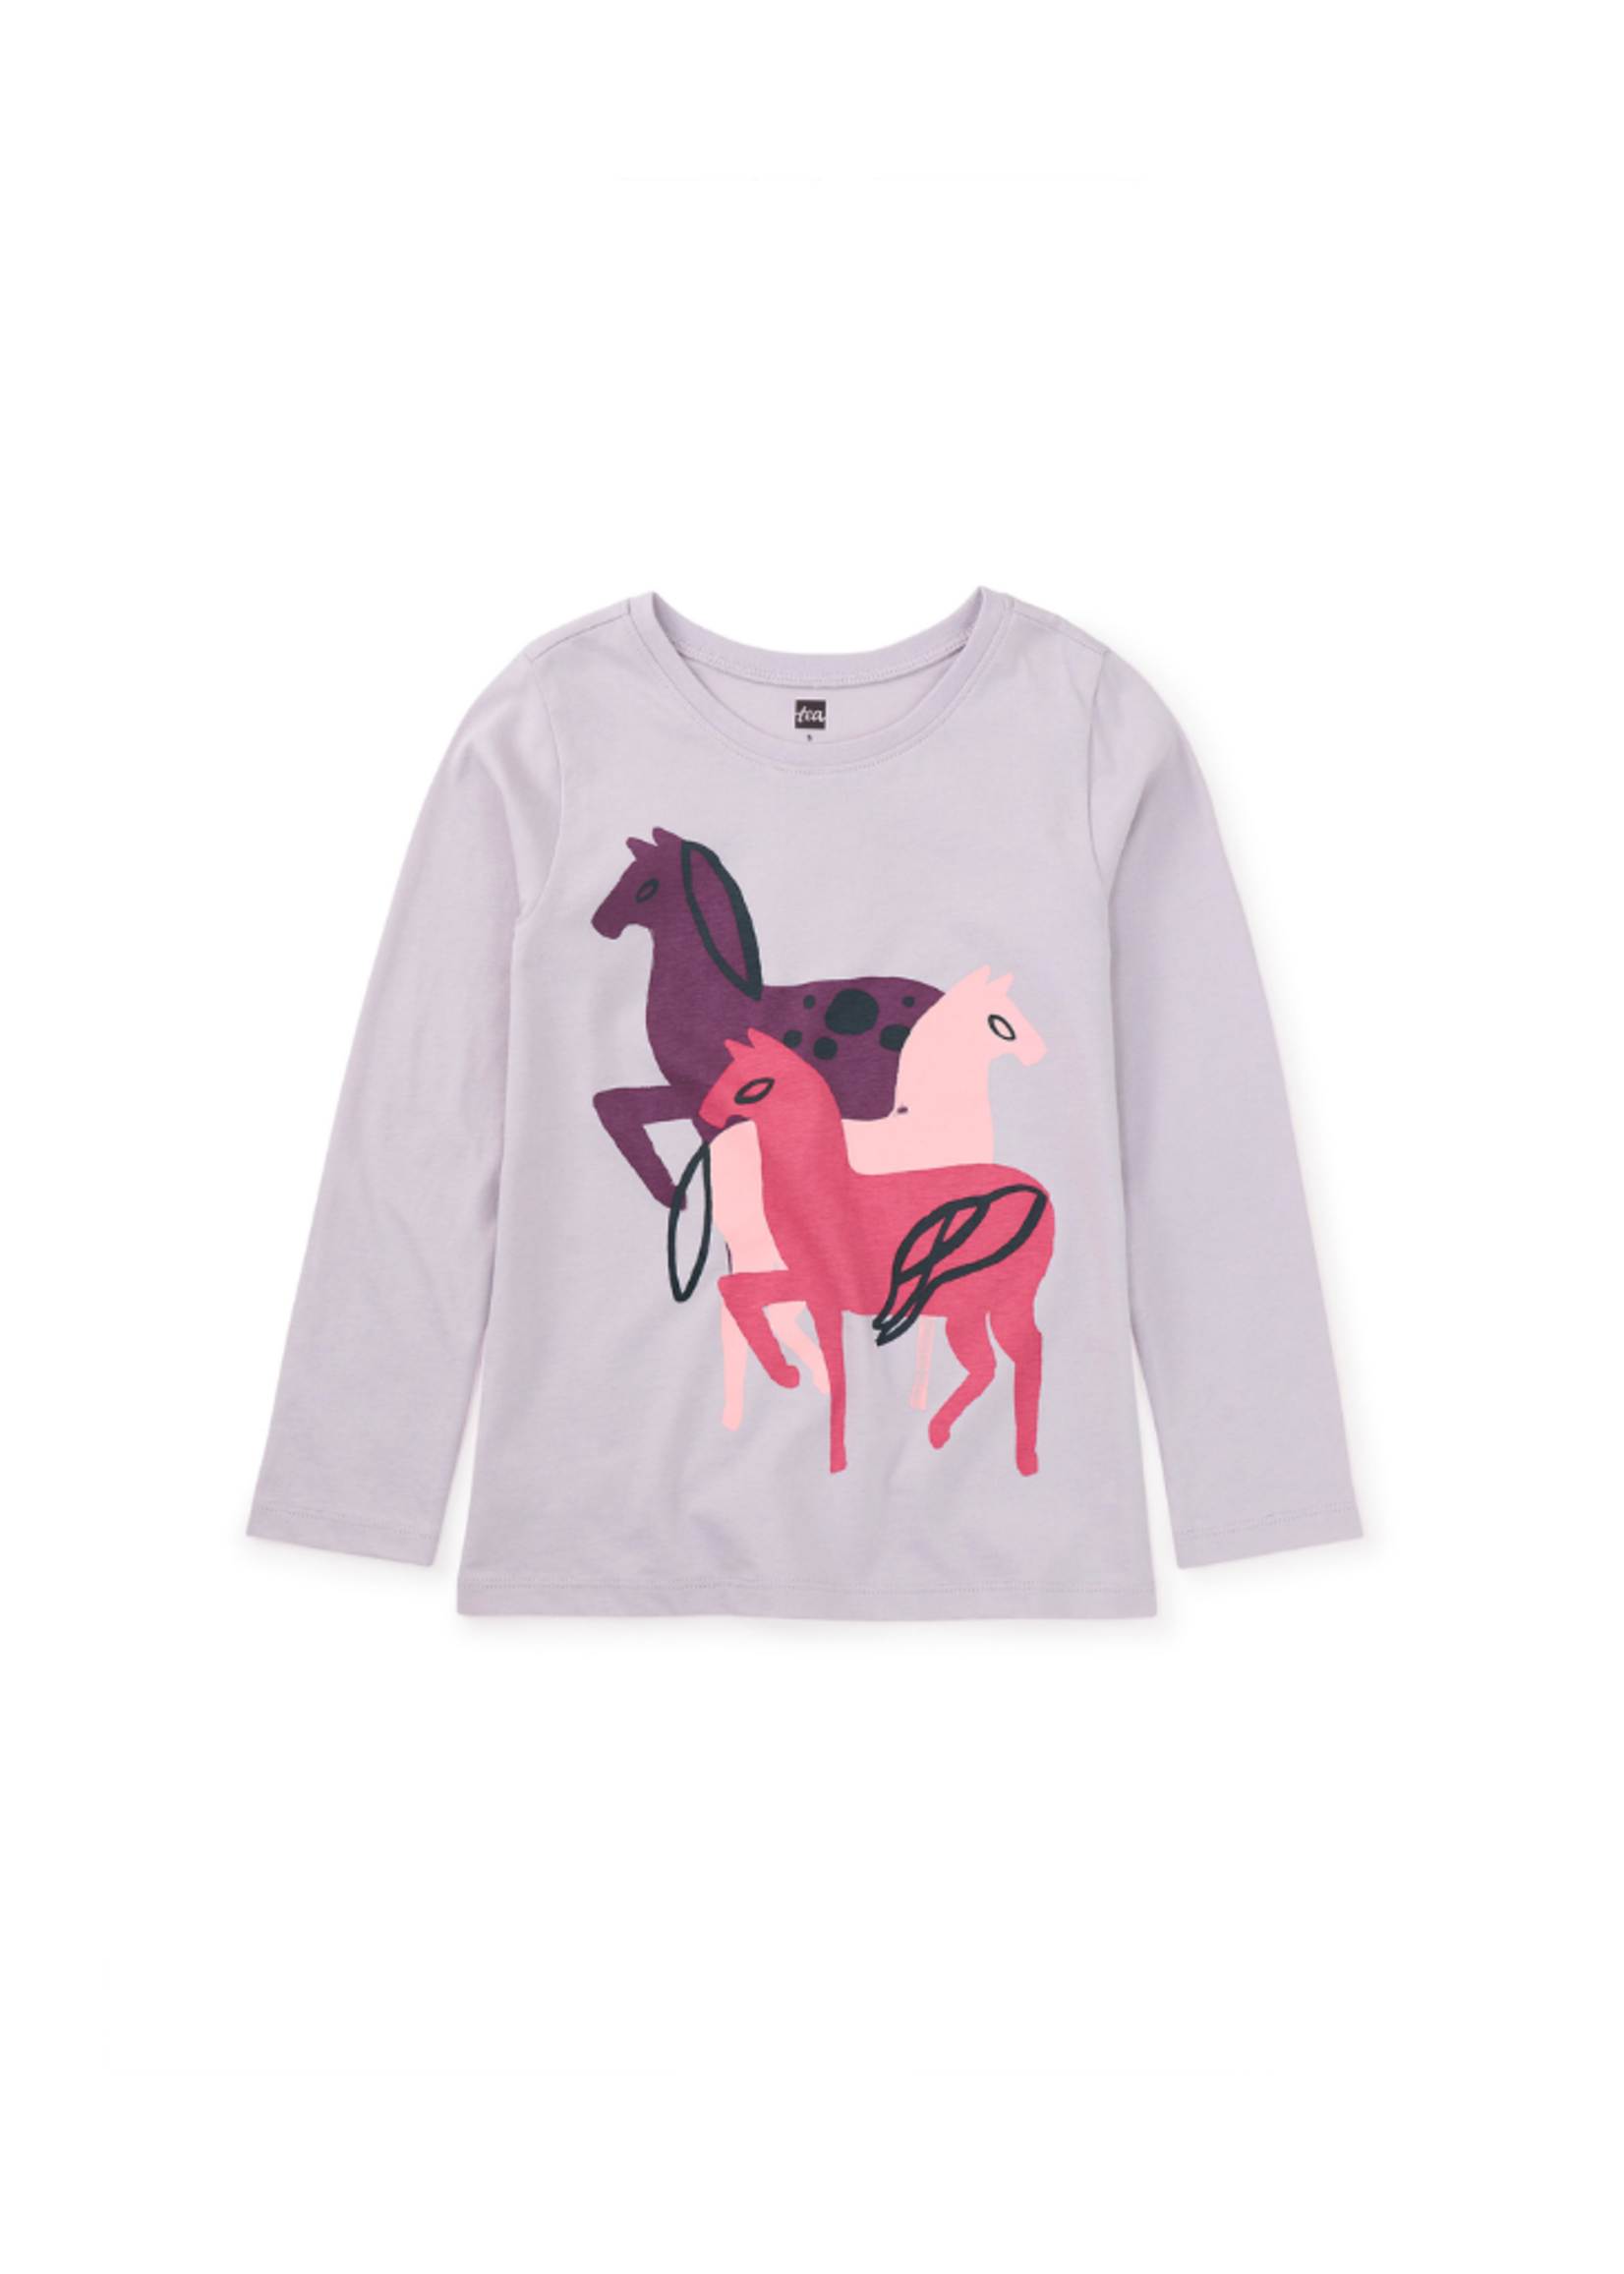 Tea Collection Horse Prance Graphic Tee